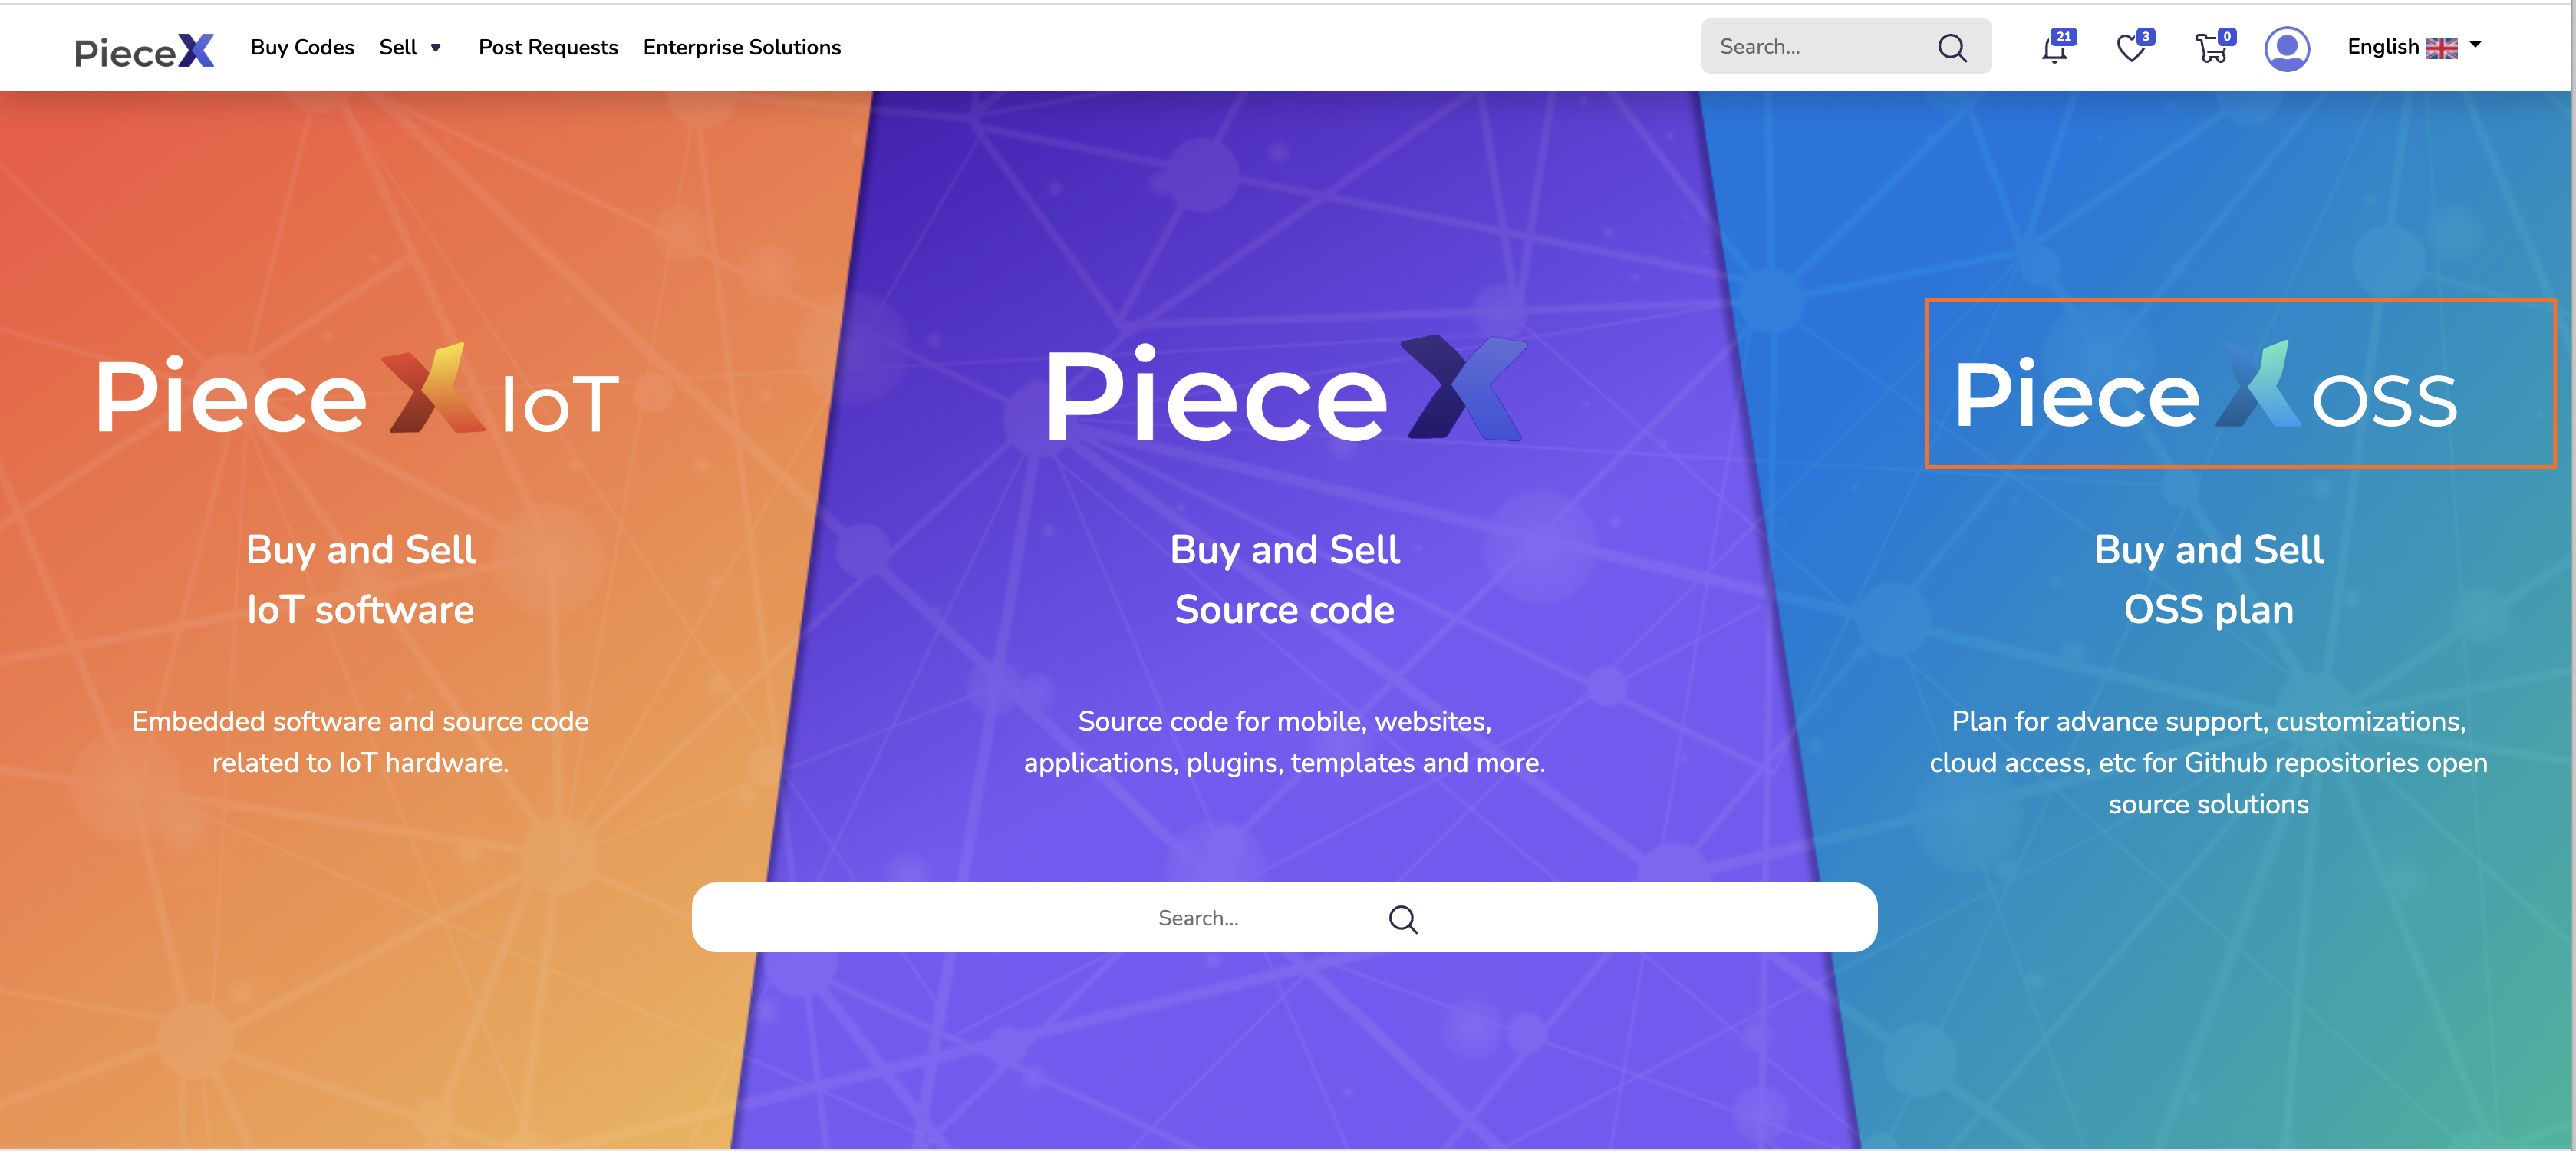 How to buy OSS plan on PieceX - Access PieceX OSS